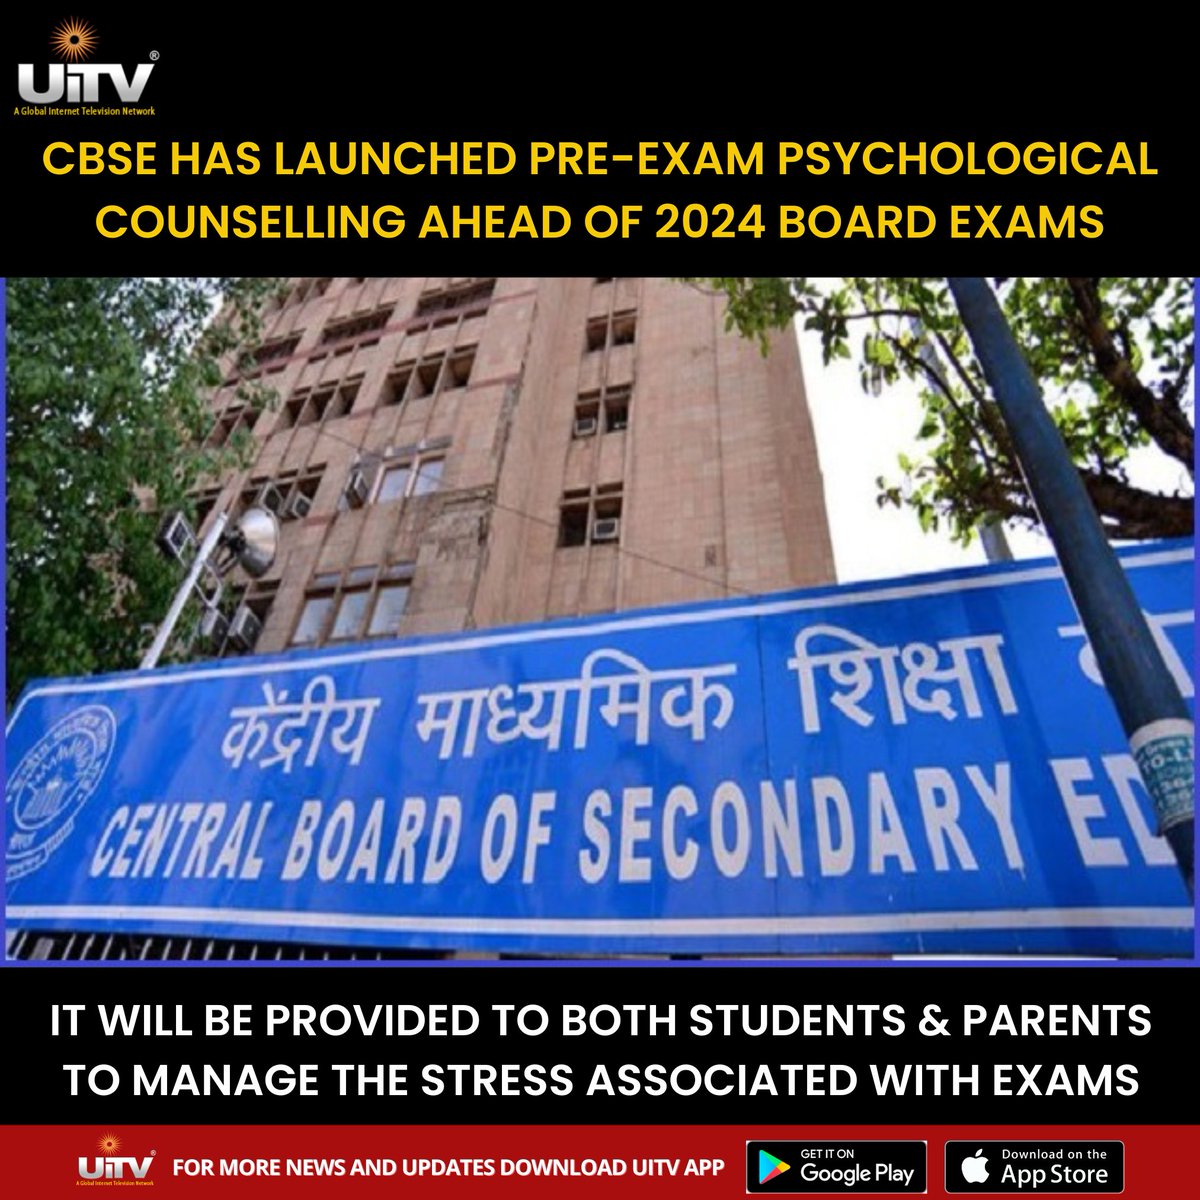 CBSE has launched pre-exam psychological counseling ahead of the 2024 board exams
#CBSE #ExamStress #BoardExams #PsychologicalCounselling #Education #StudentWellbeing #ParentalSupport #MentalHealth #ExamPreparation #2024BoardExam